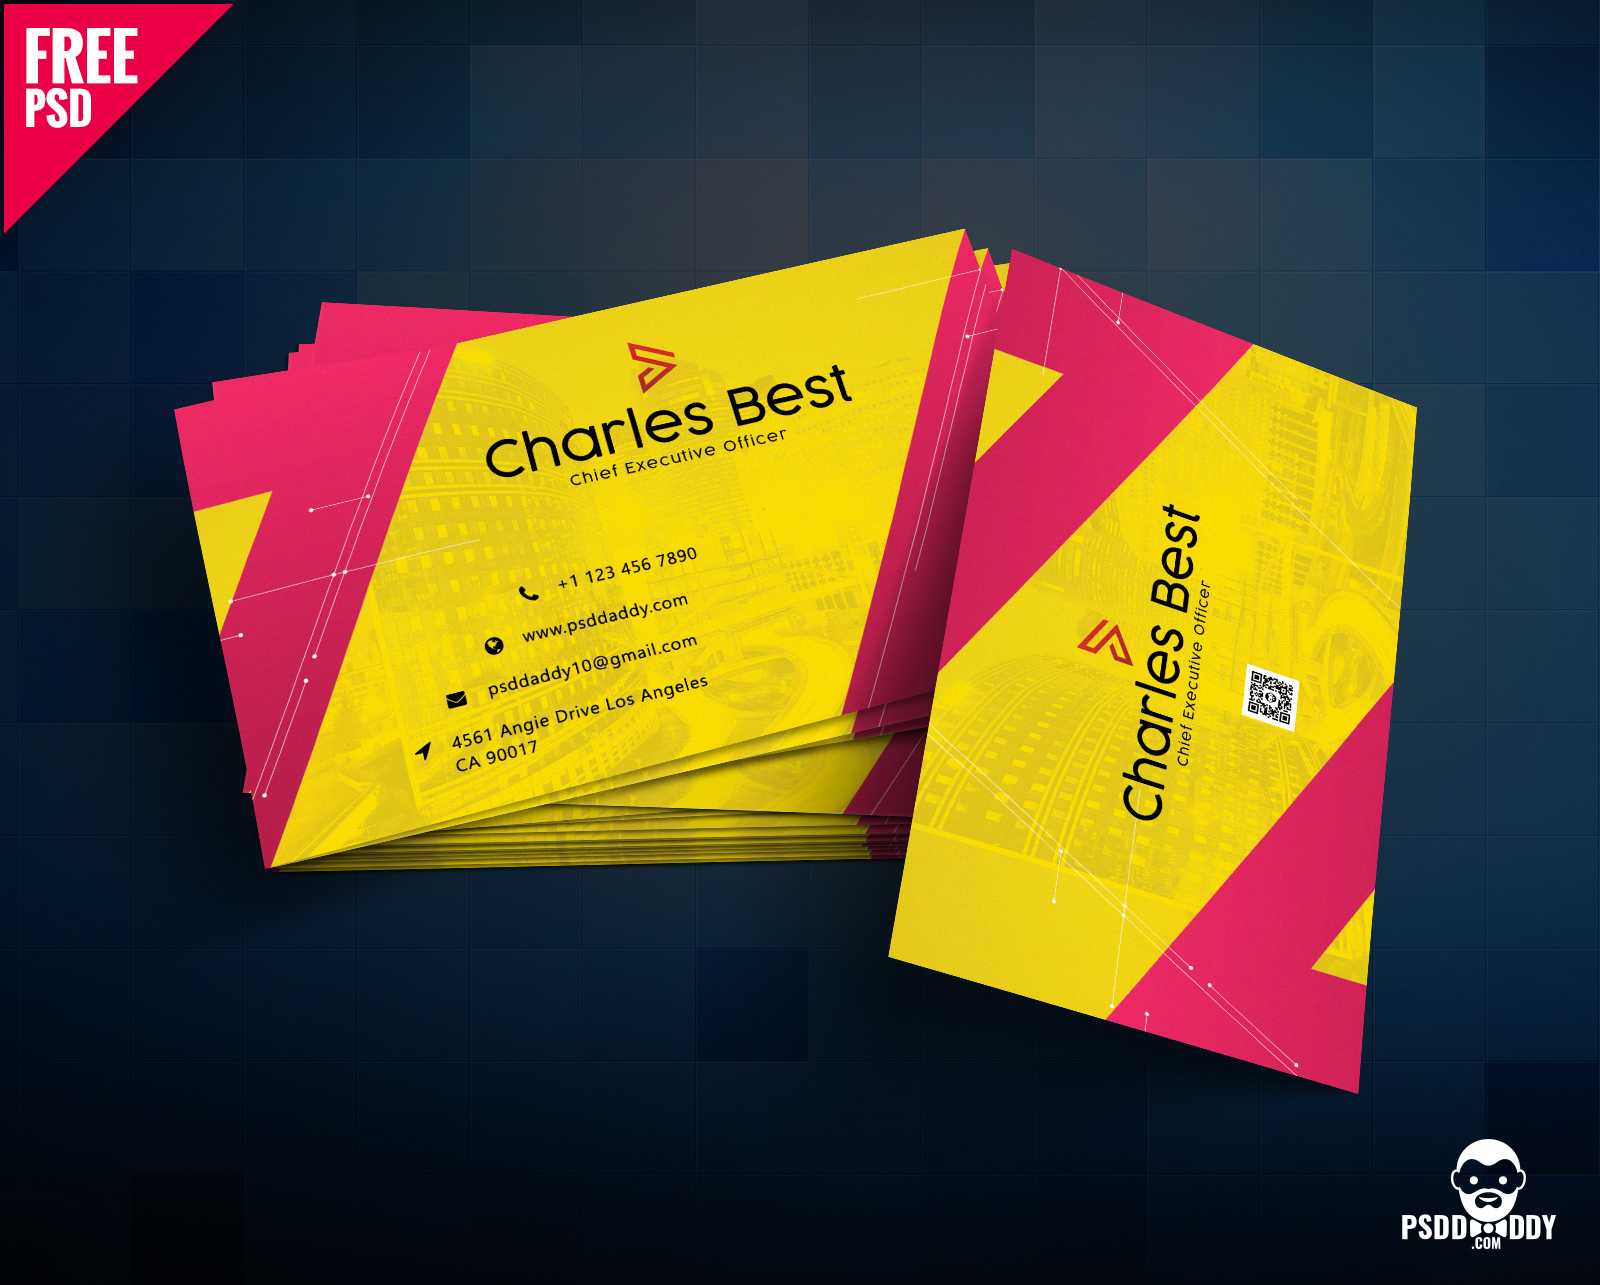 Download] Creative Business Card Free Psd | Psddaddy Within Visiting Card Psd Template